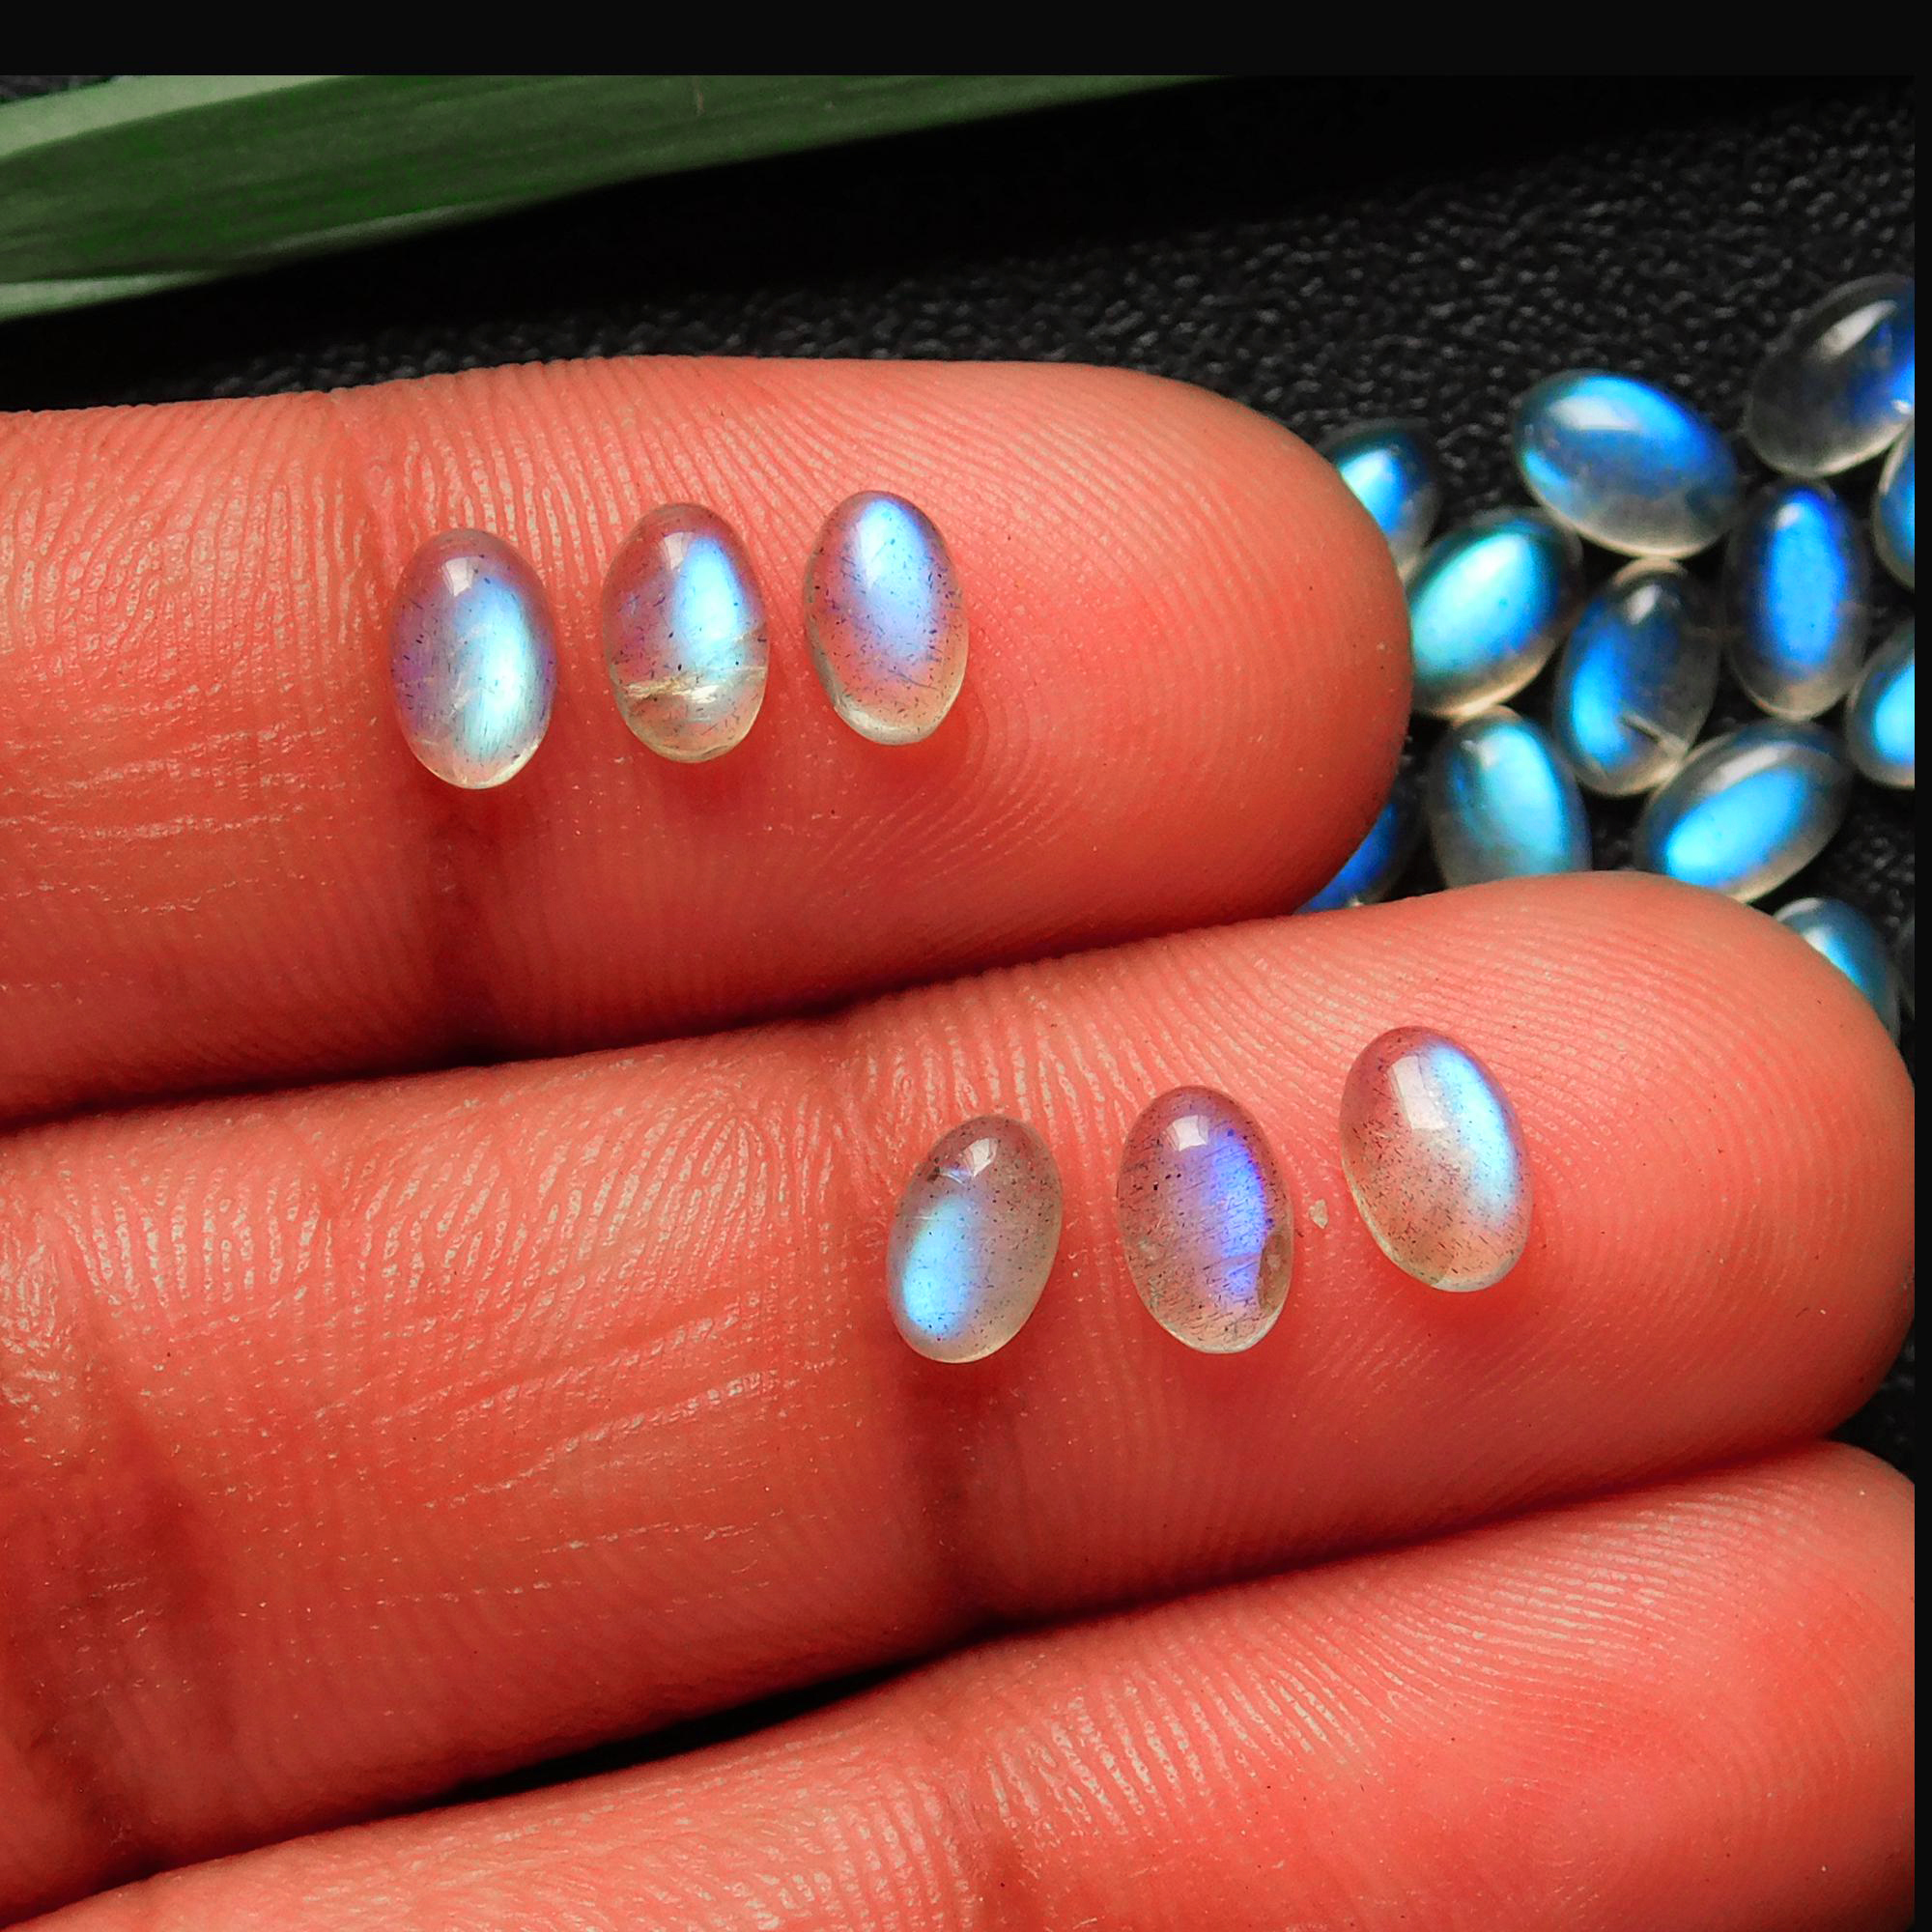 46 Pcs 25.15 Cts Natural Celibrated Labradorite Oval Cabochons Loose Gemstone Wholesale Lot Size 6x4mm